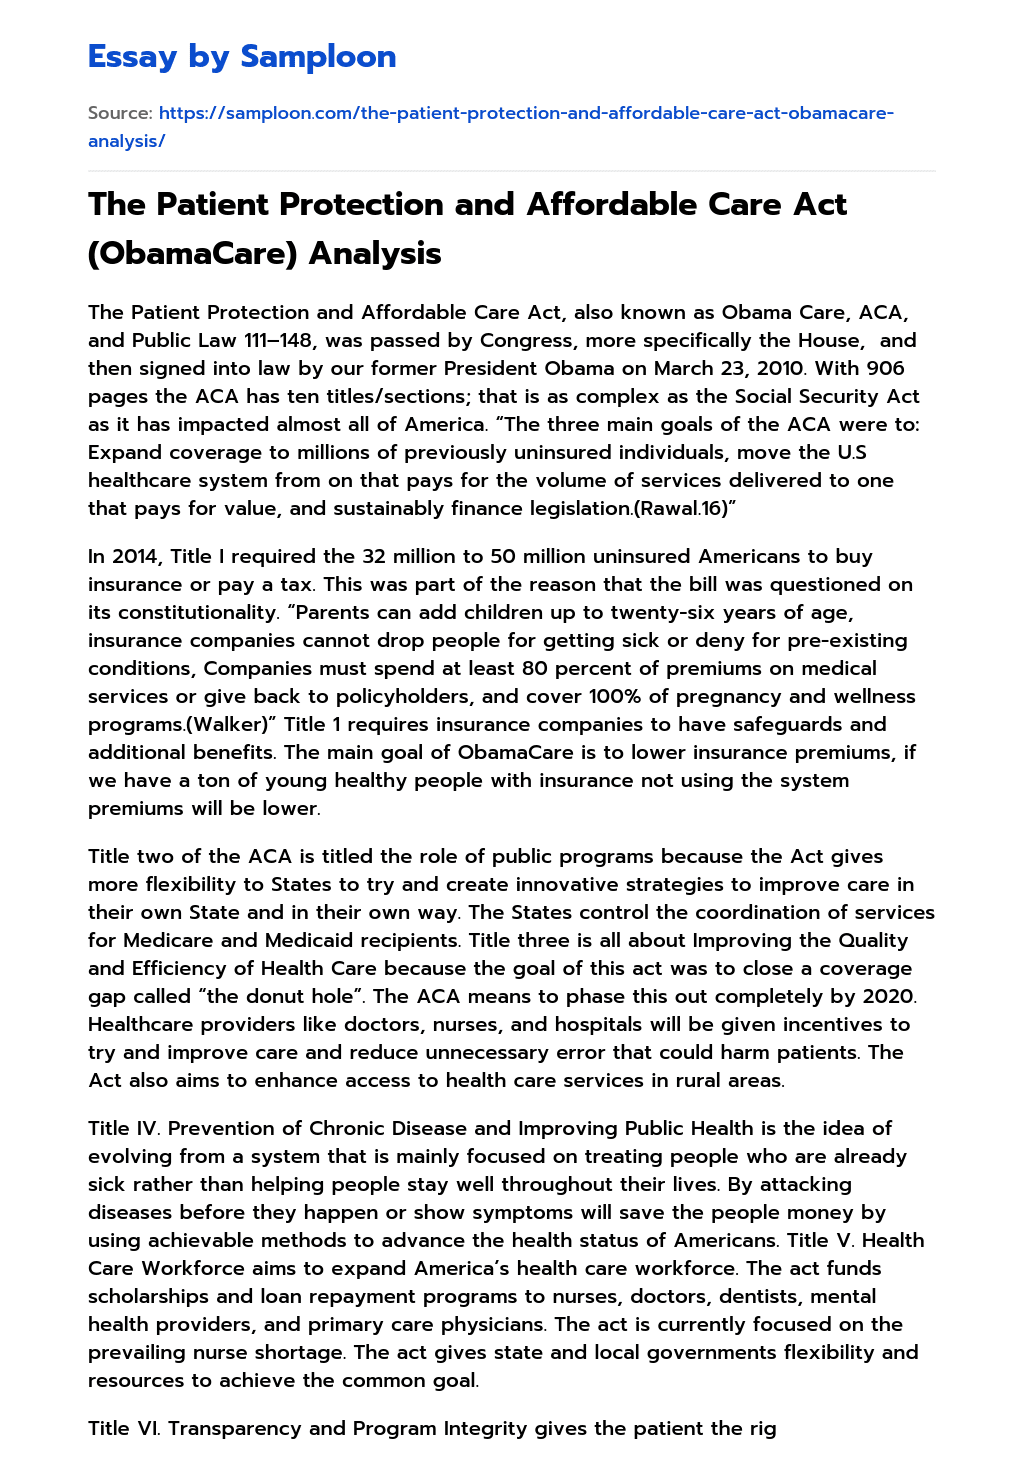 The Patient Protection and Affordable Care Act (ObamaCare) Analysis essay